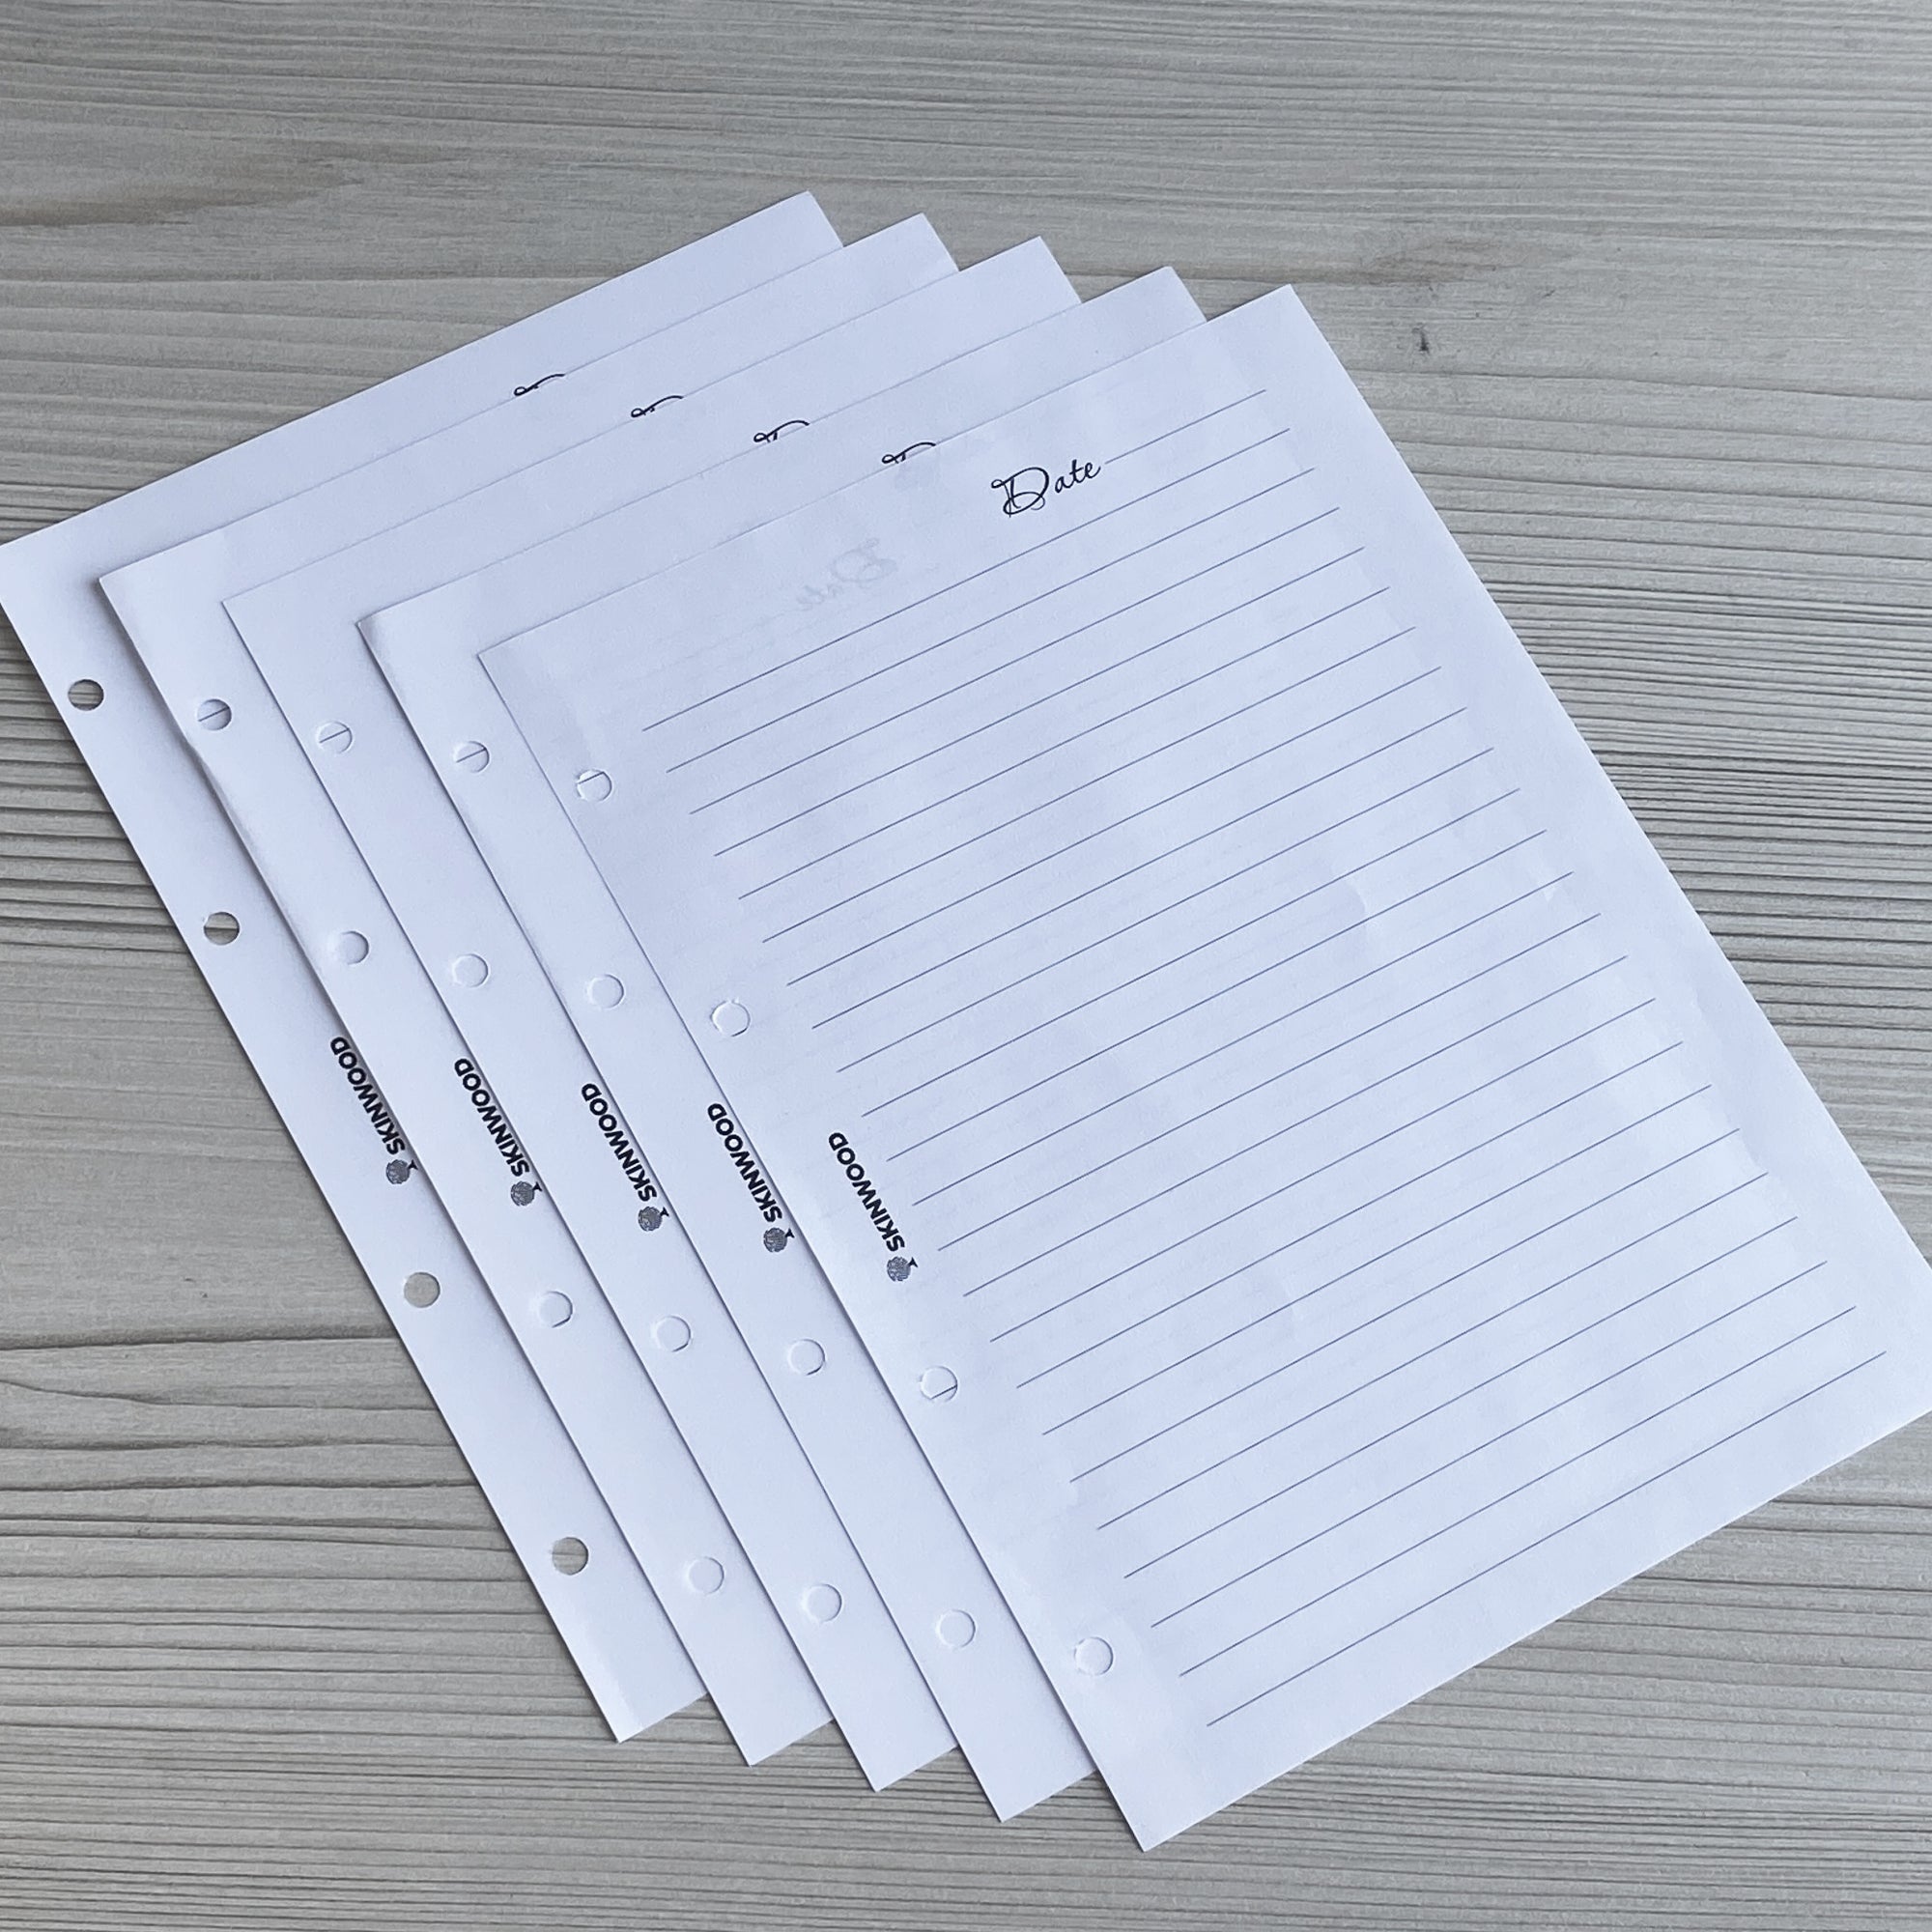 BLOCK of 70 additional sheets of paper for our Recipe Book and Notebook